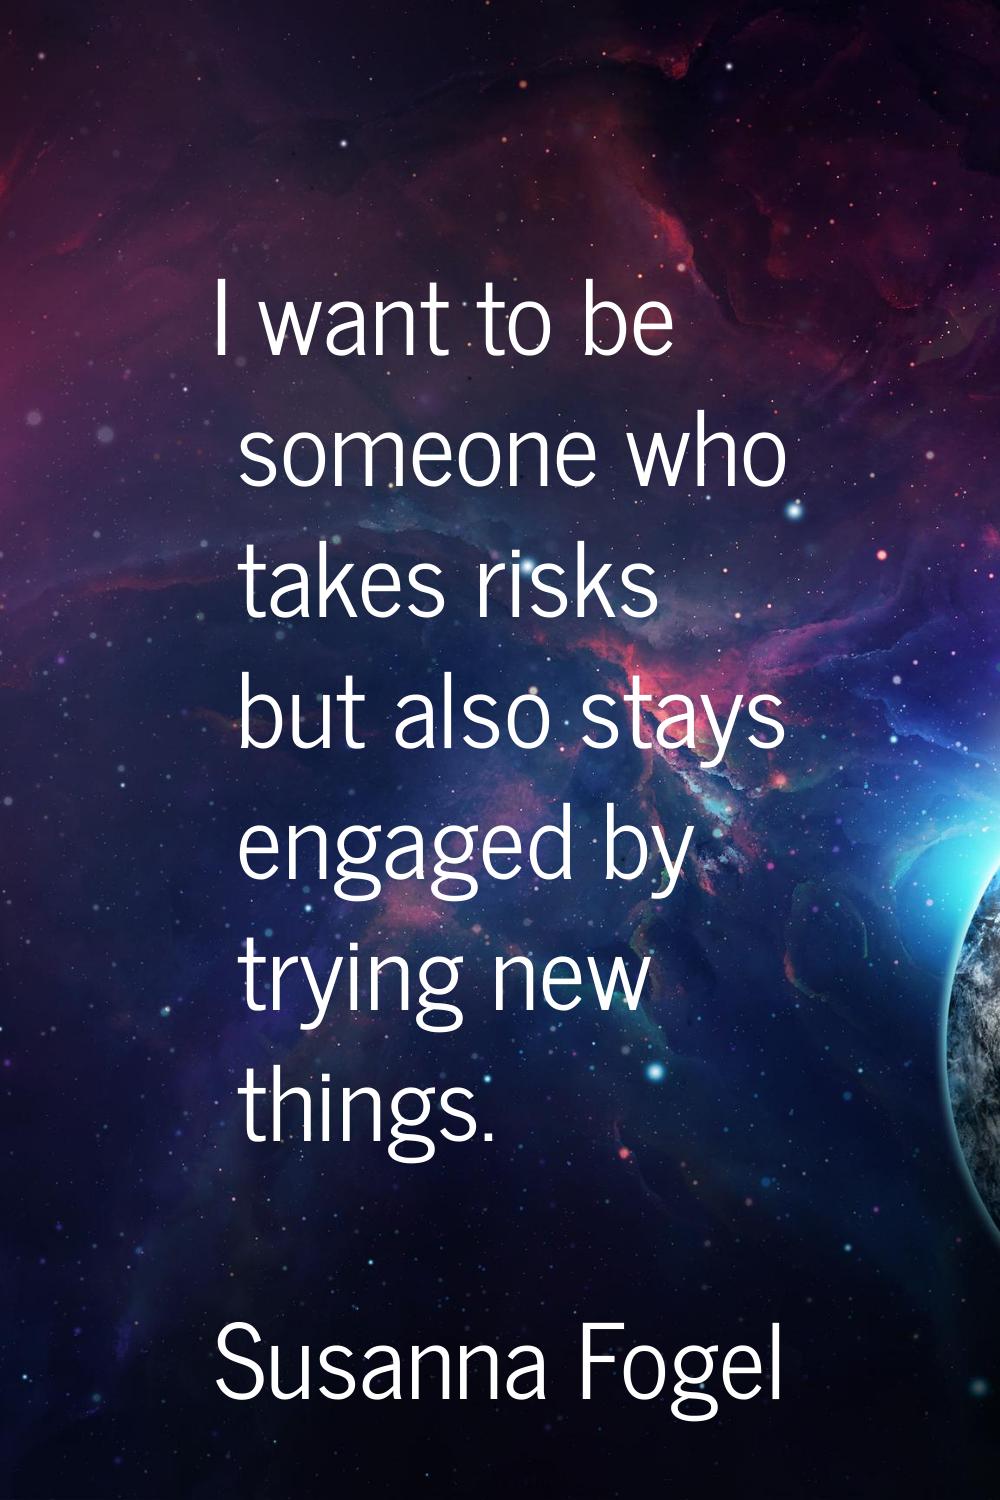 I want to be someone who takes risks but also stays engaged by trying new things.